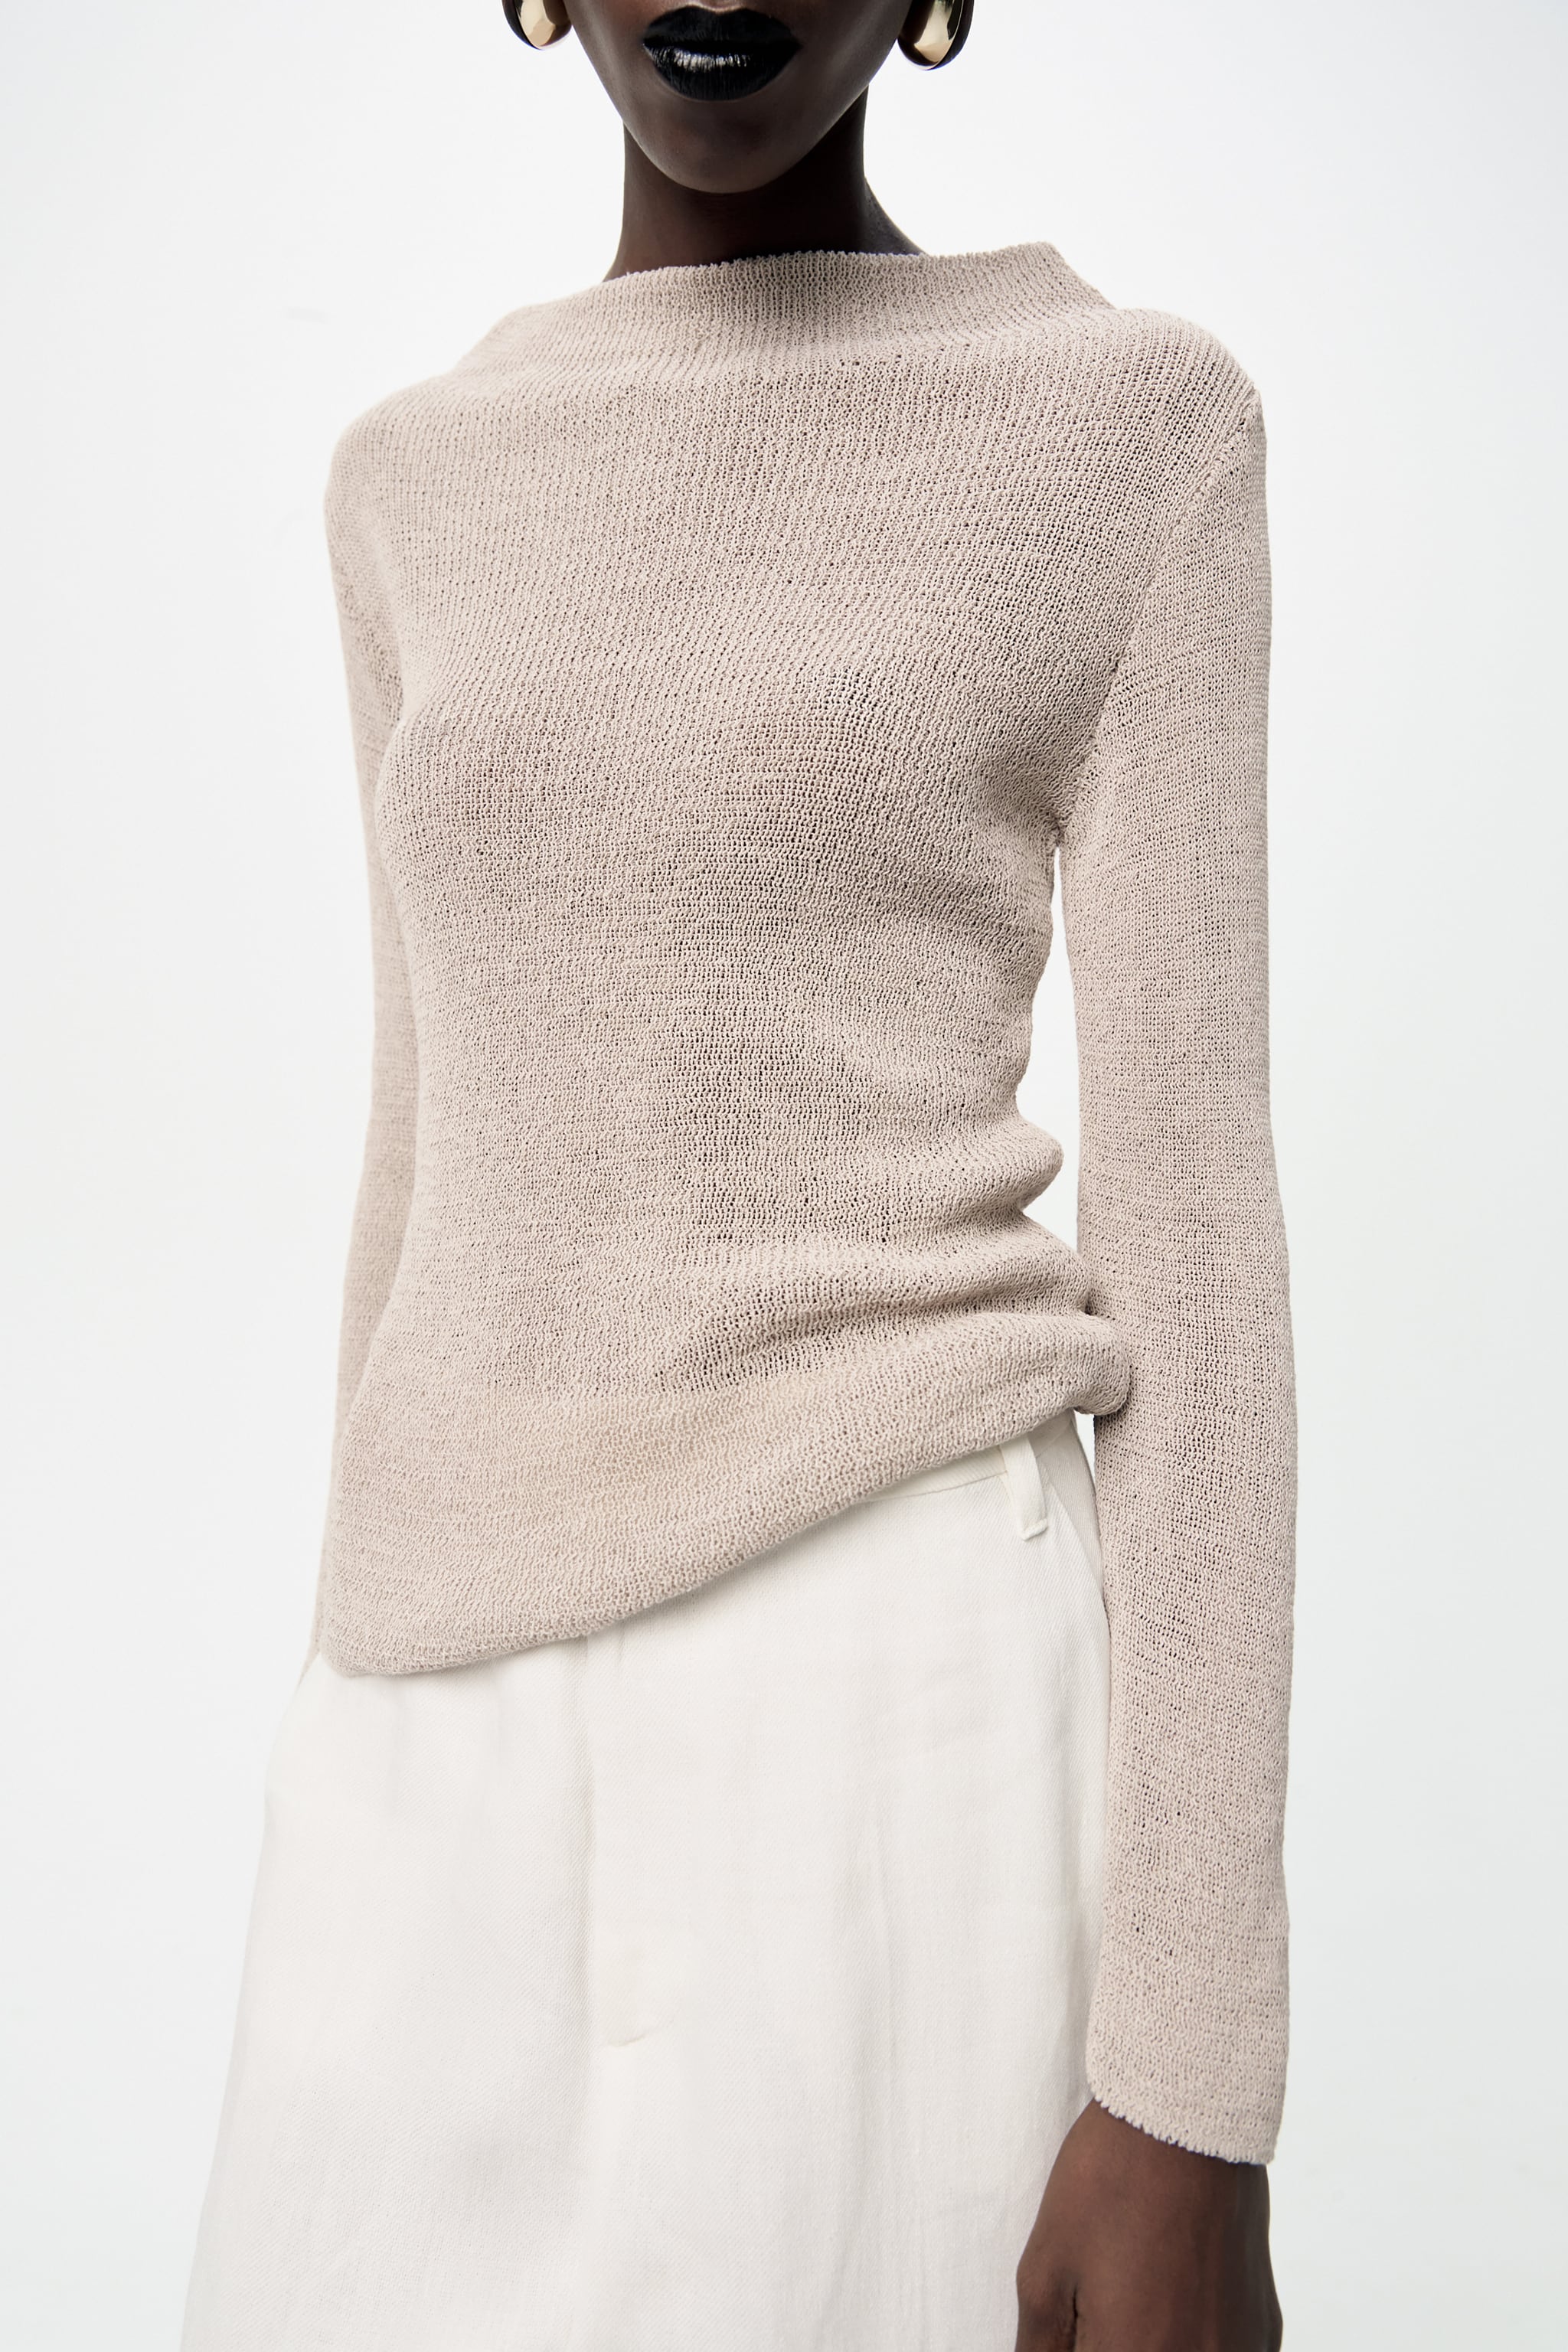 BASIC TEXTURED KNIT SWEATER